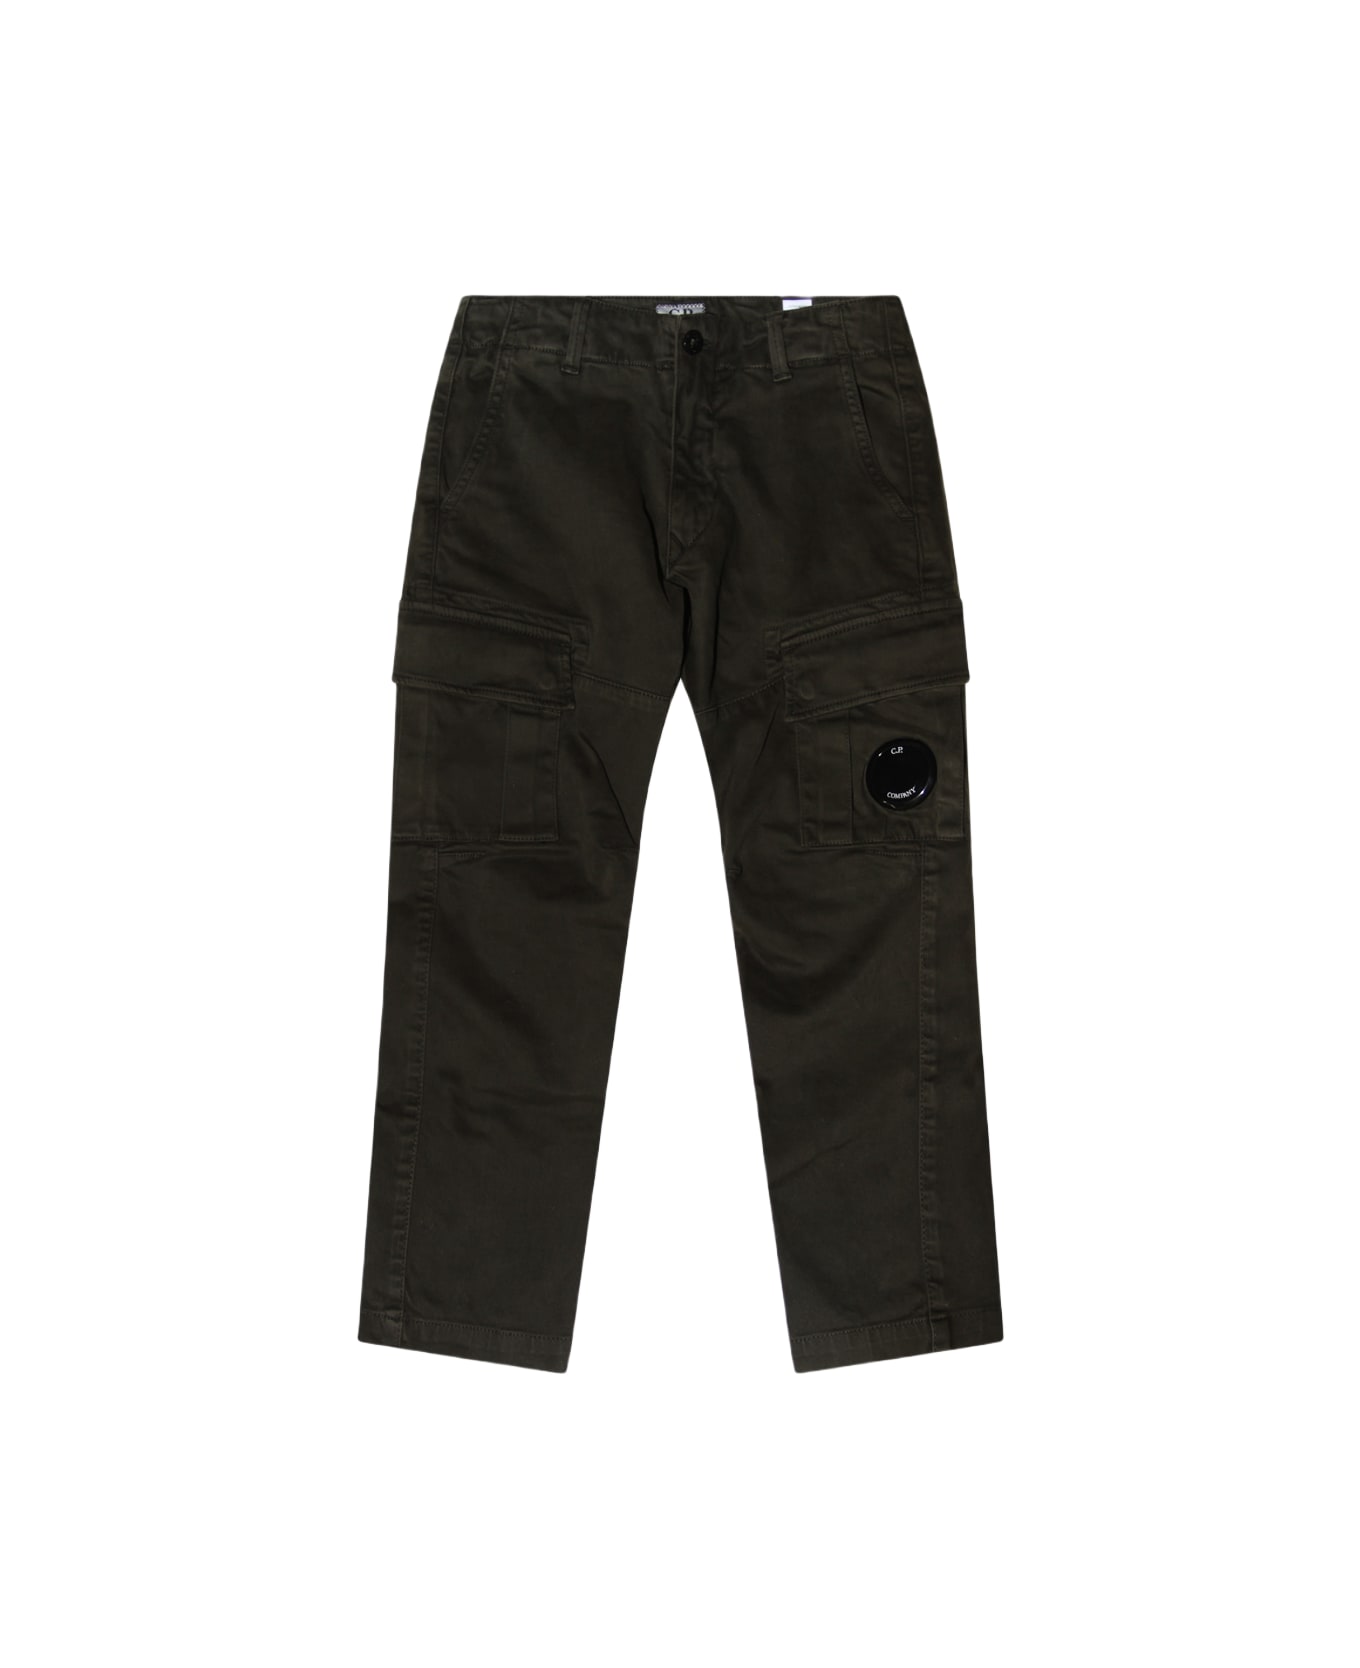 C.P. Company Ivy Green Cotton Stretch Pants - IVY GREEN ボトムス